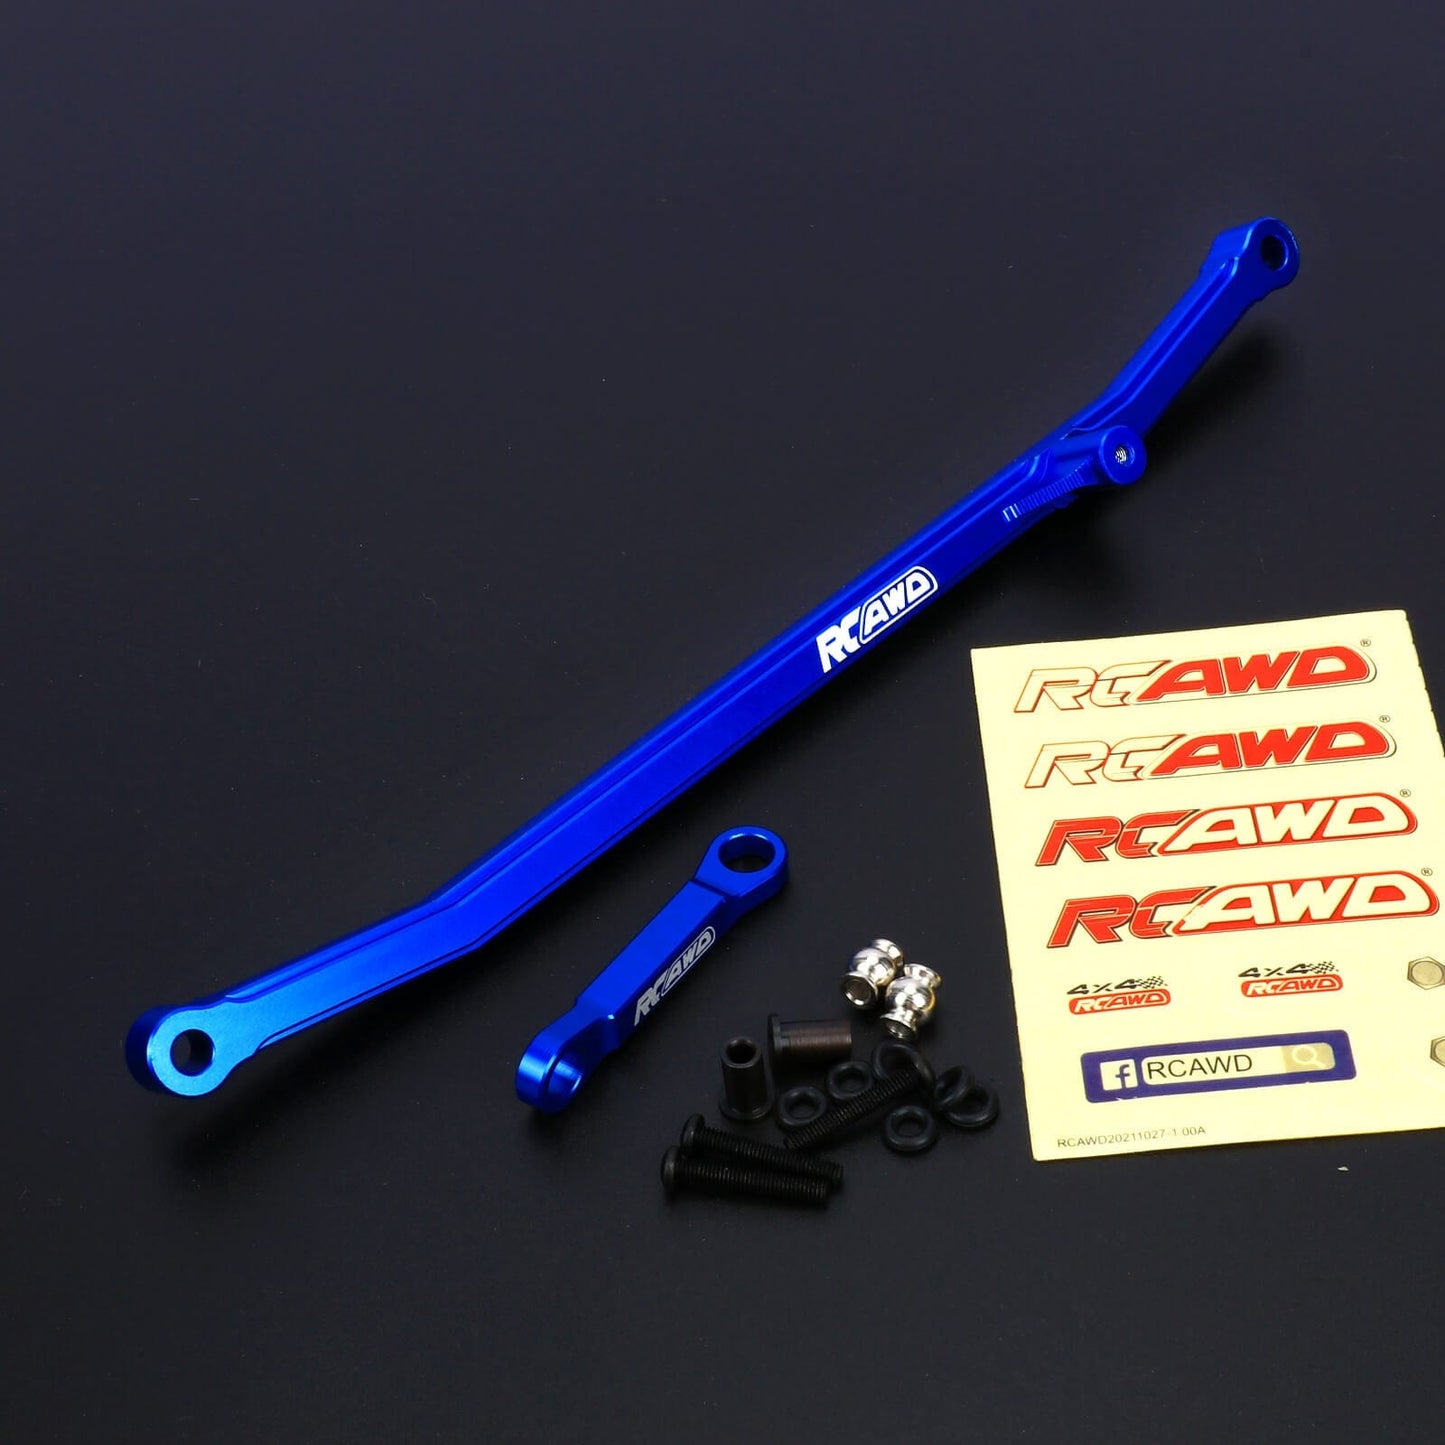 RCAWD LOSI 1/8 LMT Blue RCAWD Losi LMT Upgrades Aluminum Steering Linkage Set